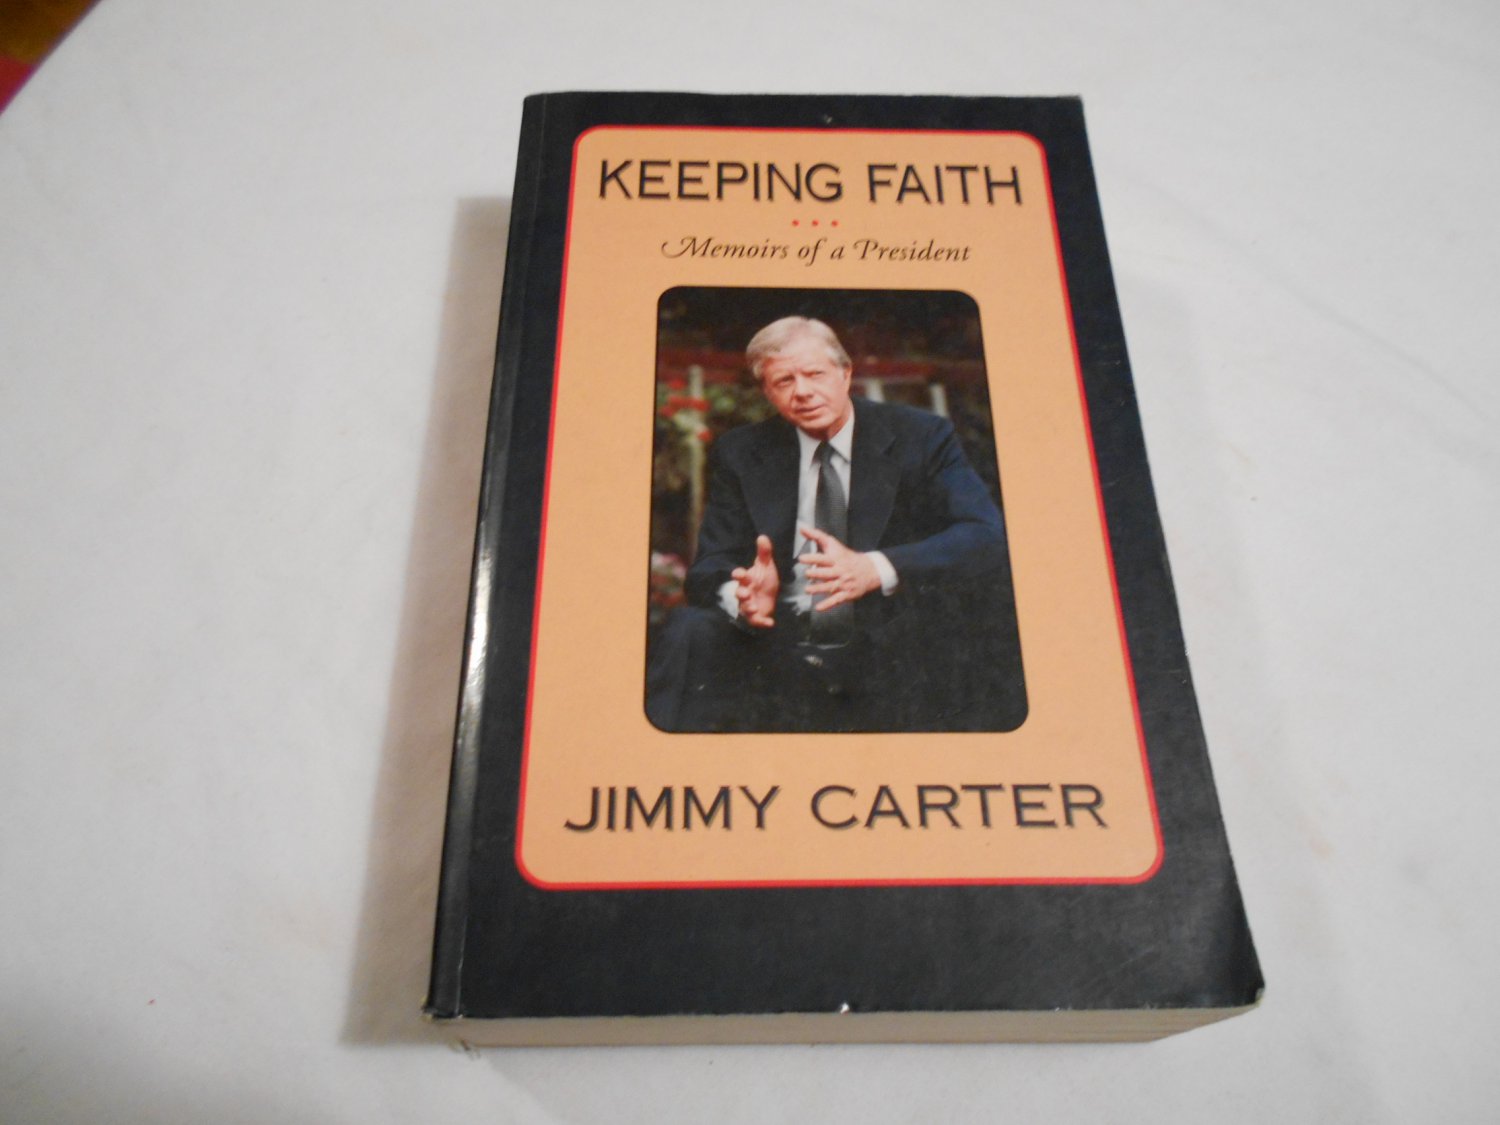 Keeping Faith Memoirs of a President by Jimmy Carter ~ SIGNED Copy (1995) (GR3)